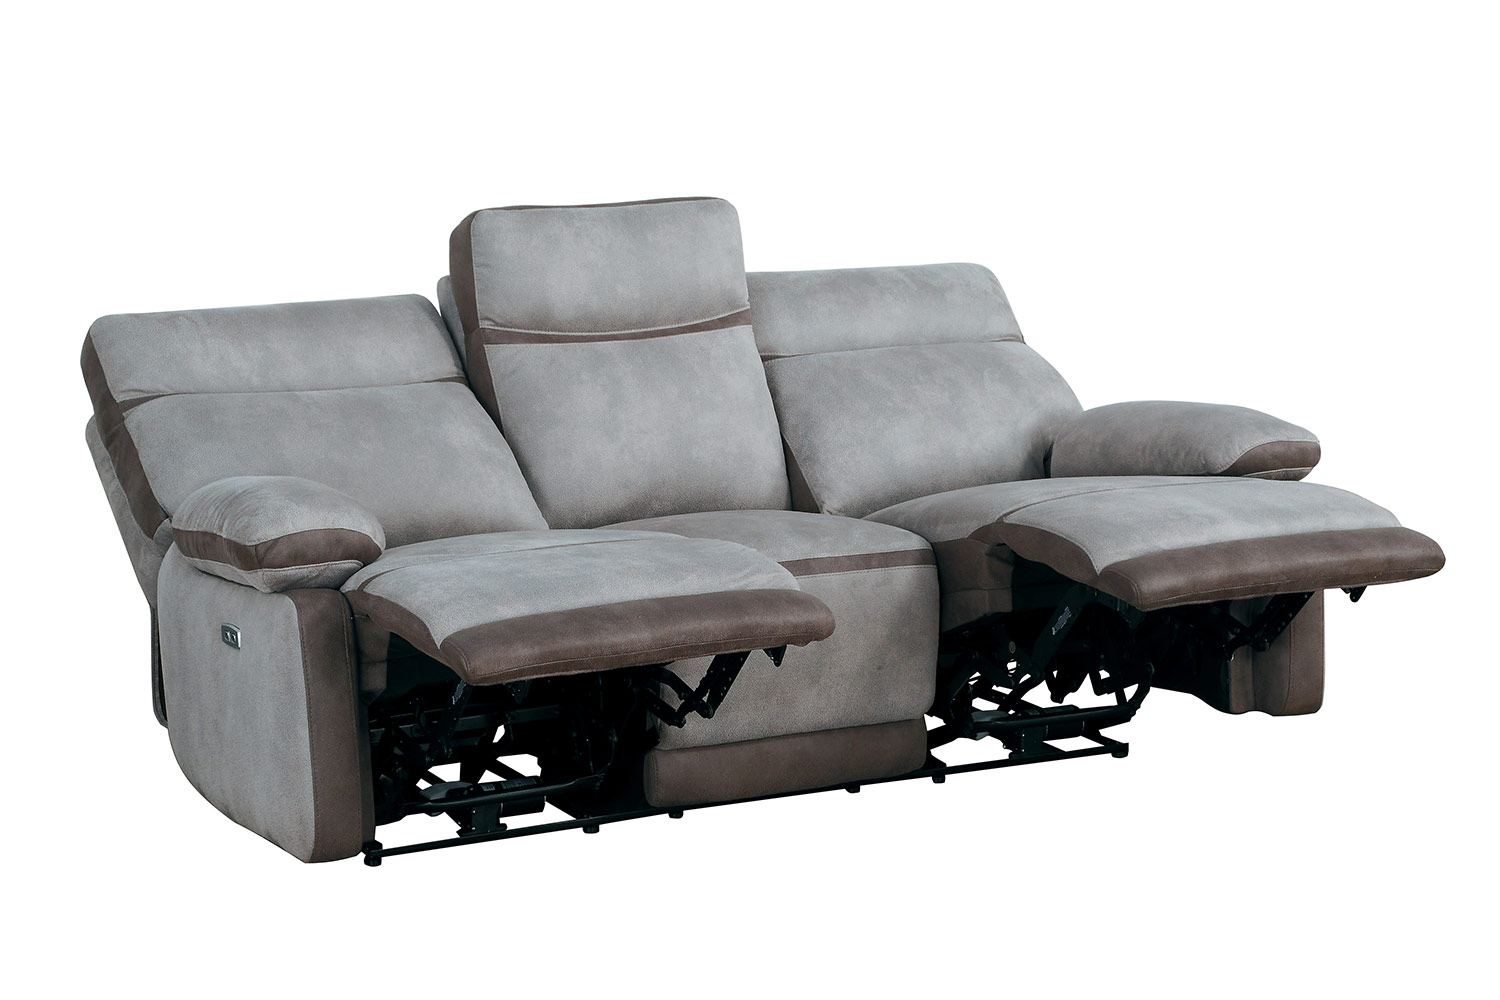 Homelegance Barilotto Power Double Reclining Sofa With Power Headrests - Gray